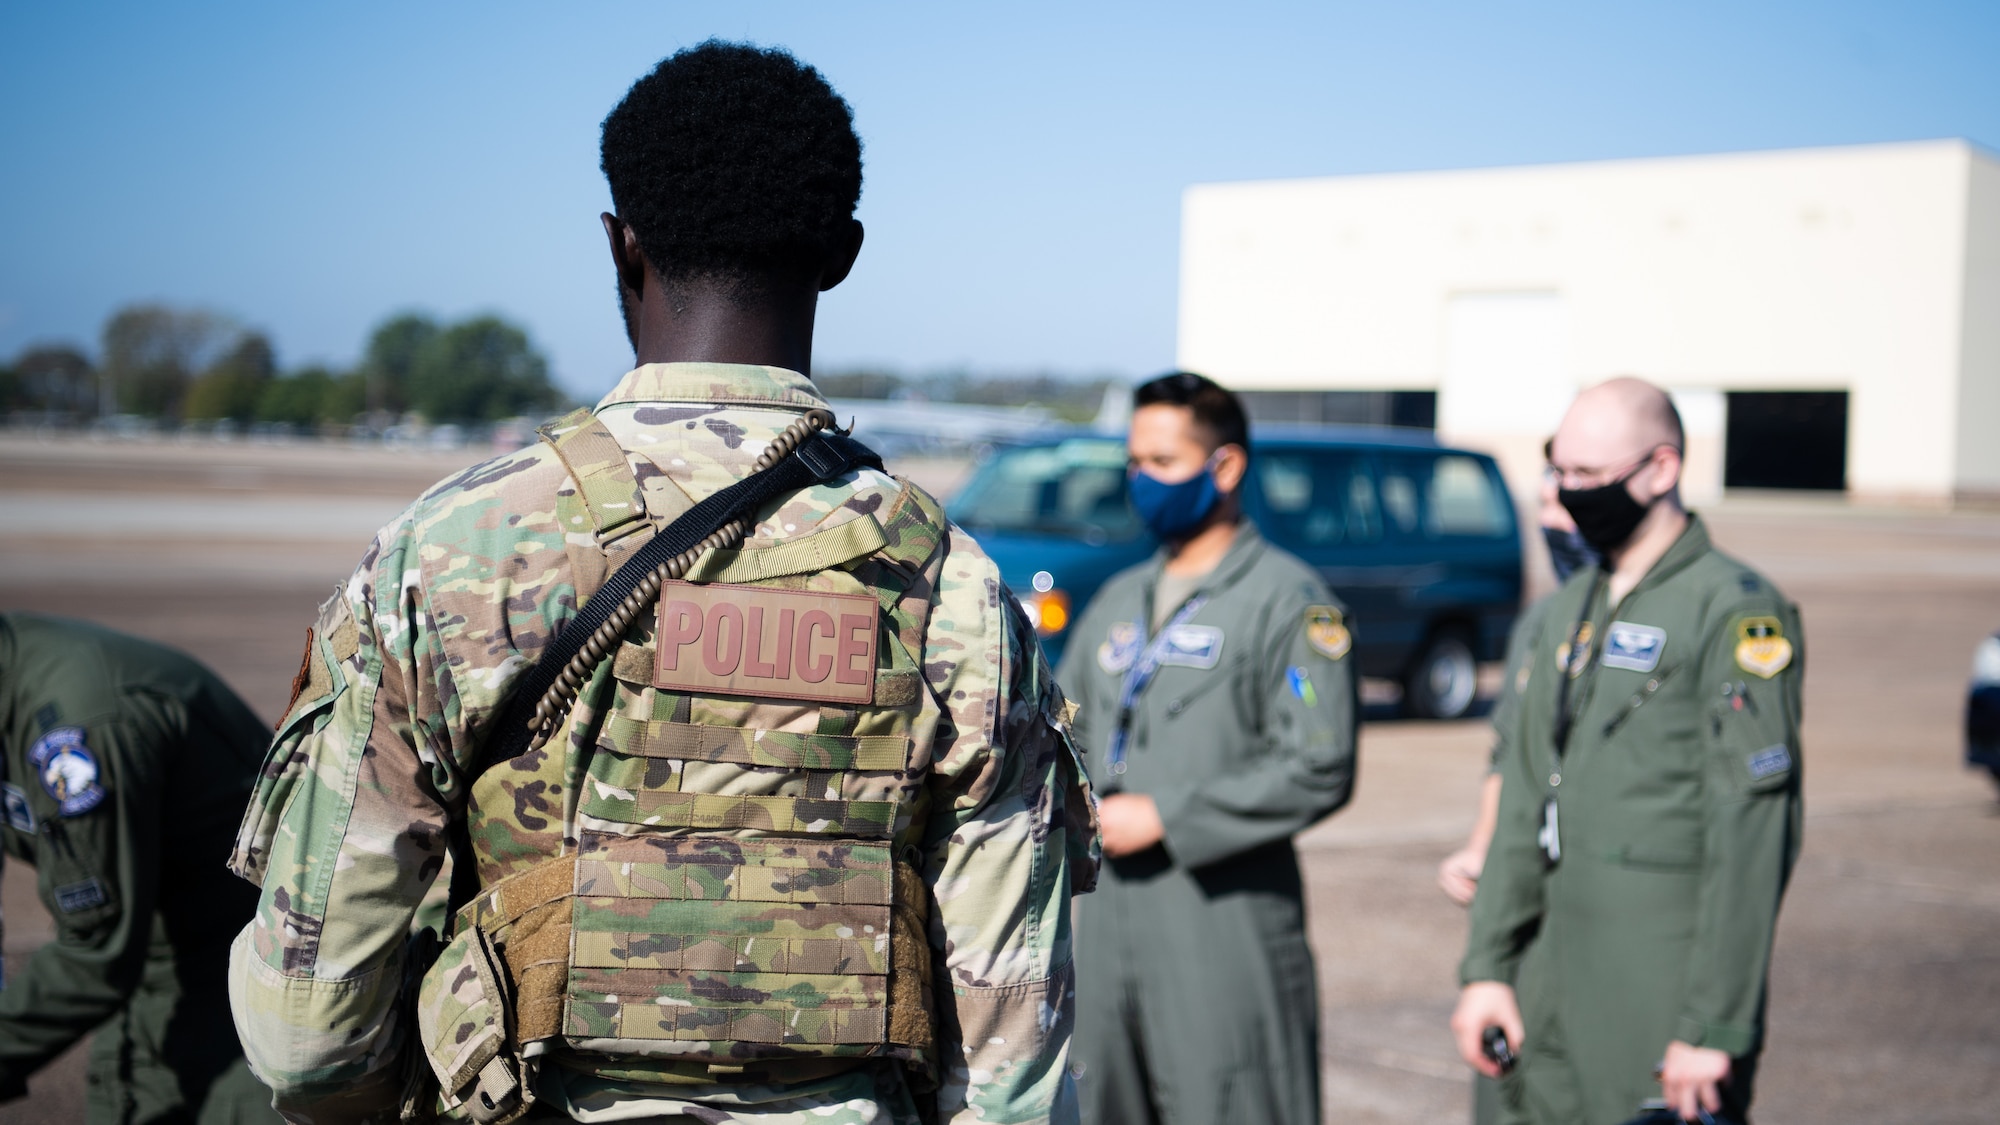 Airman 1st Class Christopher Wimbley, 2nd Security Forces installation entry controller, stands guard at an entry control point during Global Thunder 21 at Barksdale Air Force Base, La., Oct. 22, 2020.